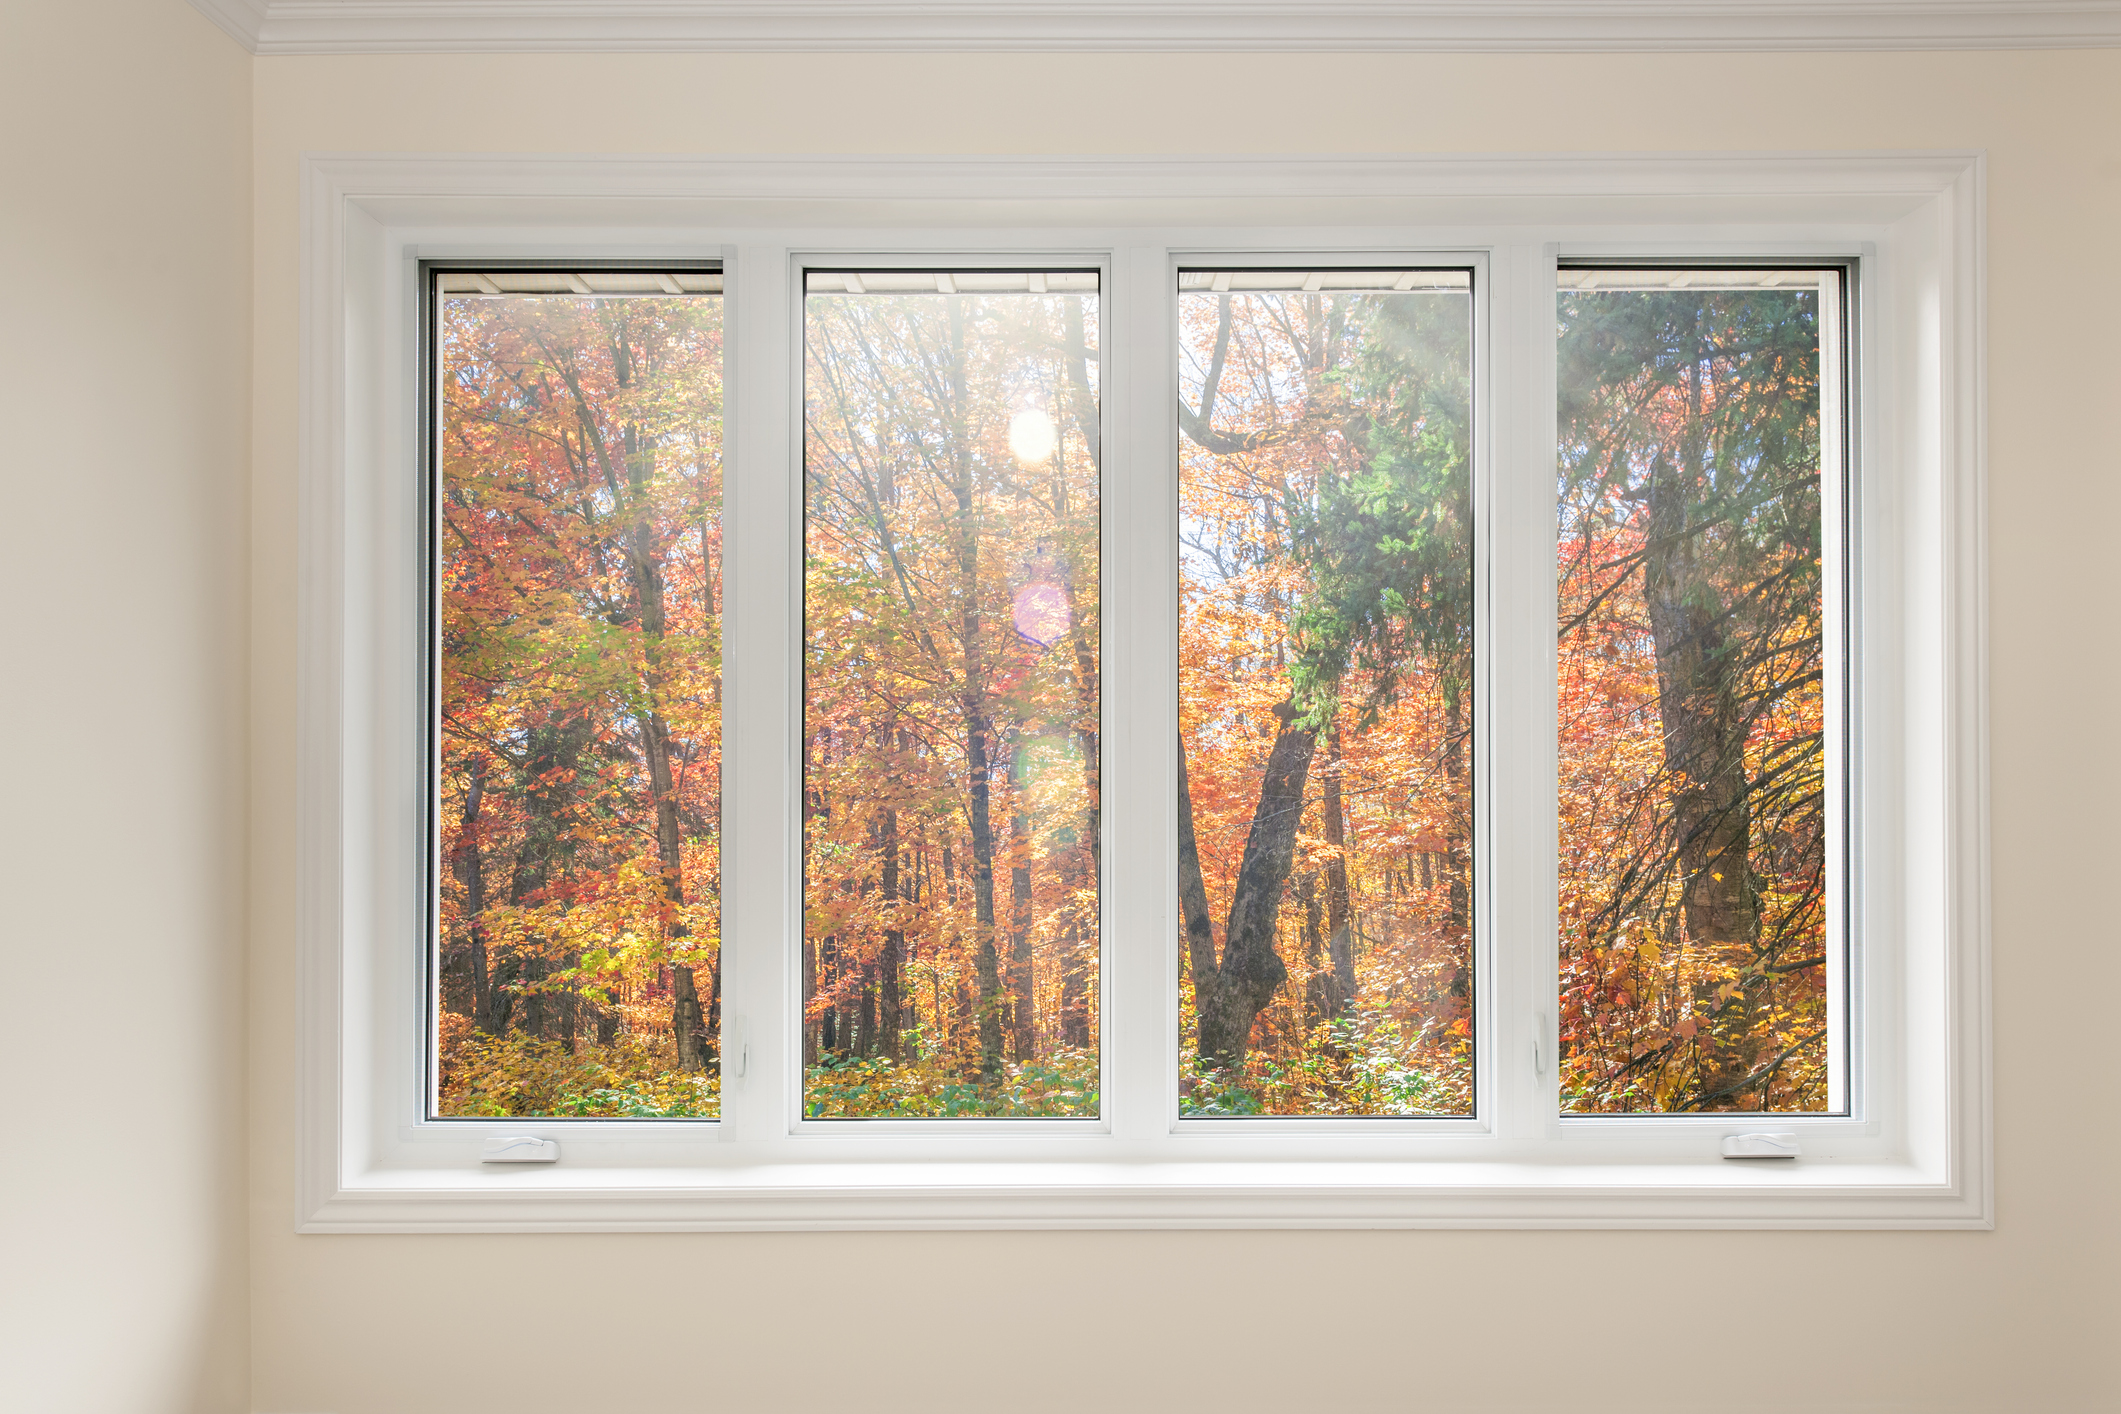 Window with a view of autumn trees